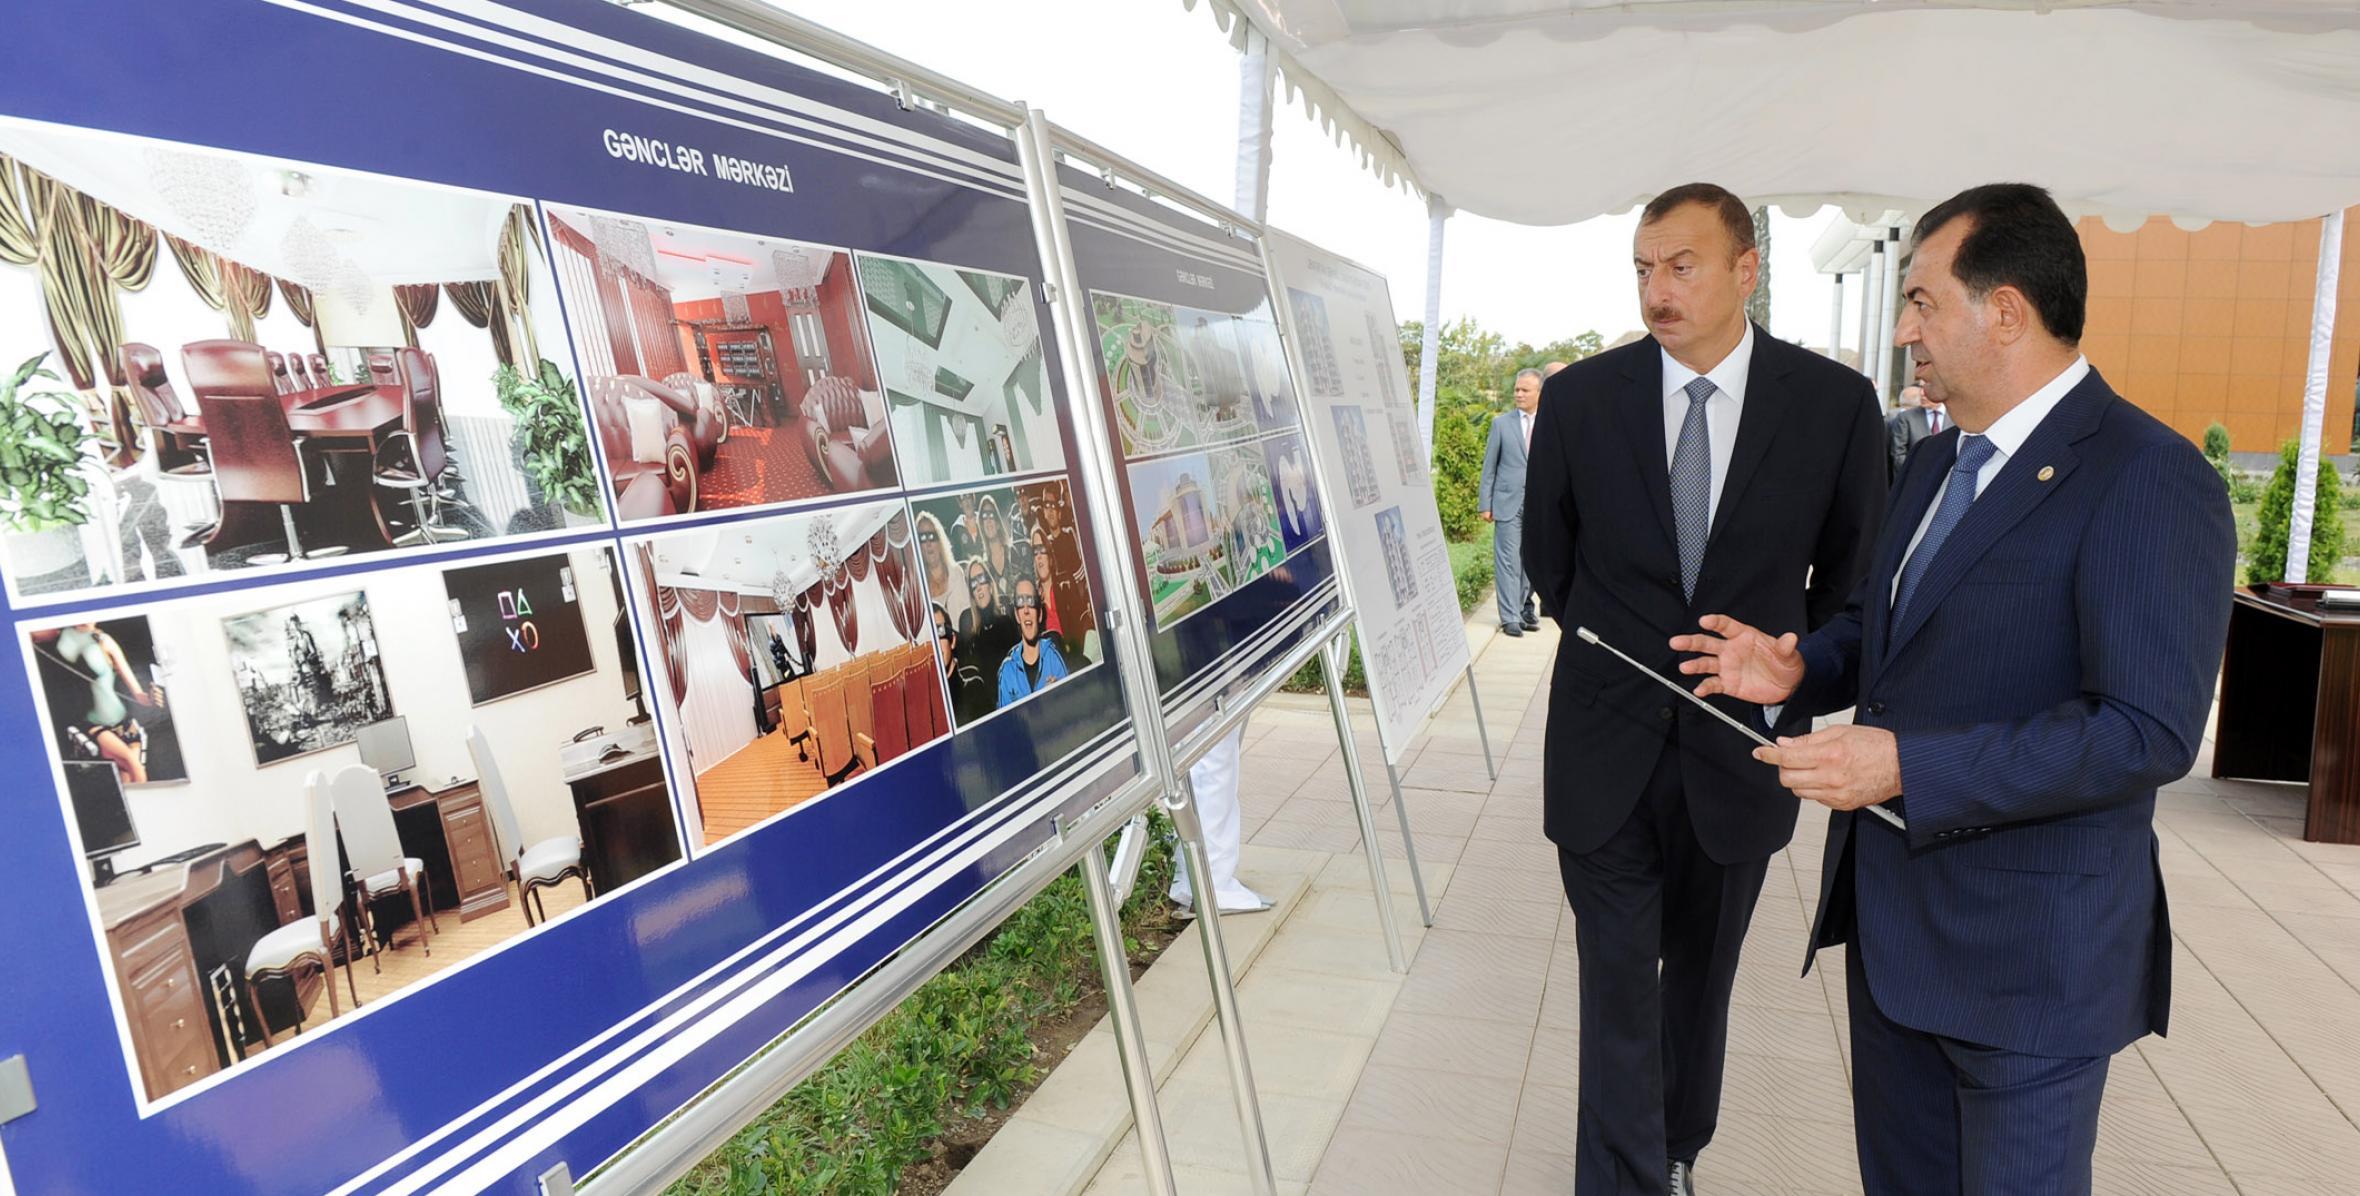 Ilham Aliyev attended a groundbreaking ceremony for a Youth Center in Lankaran